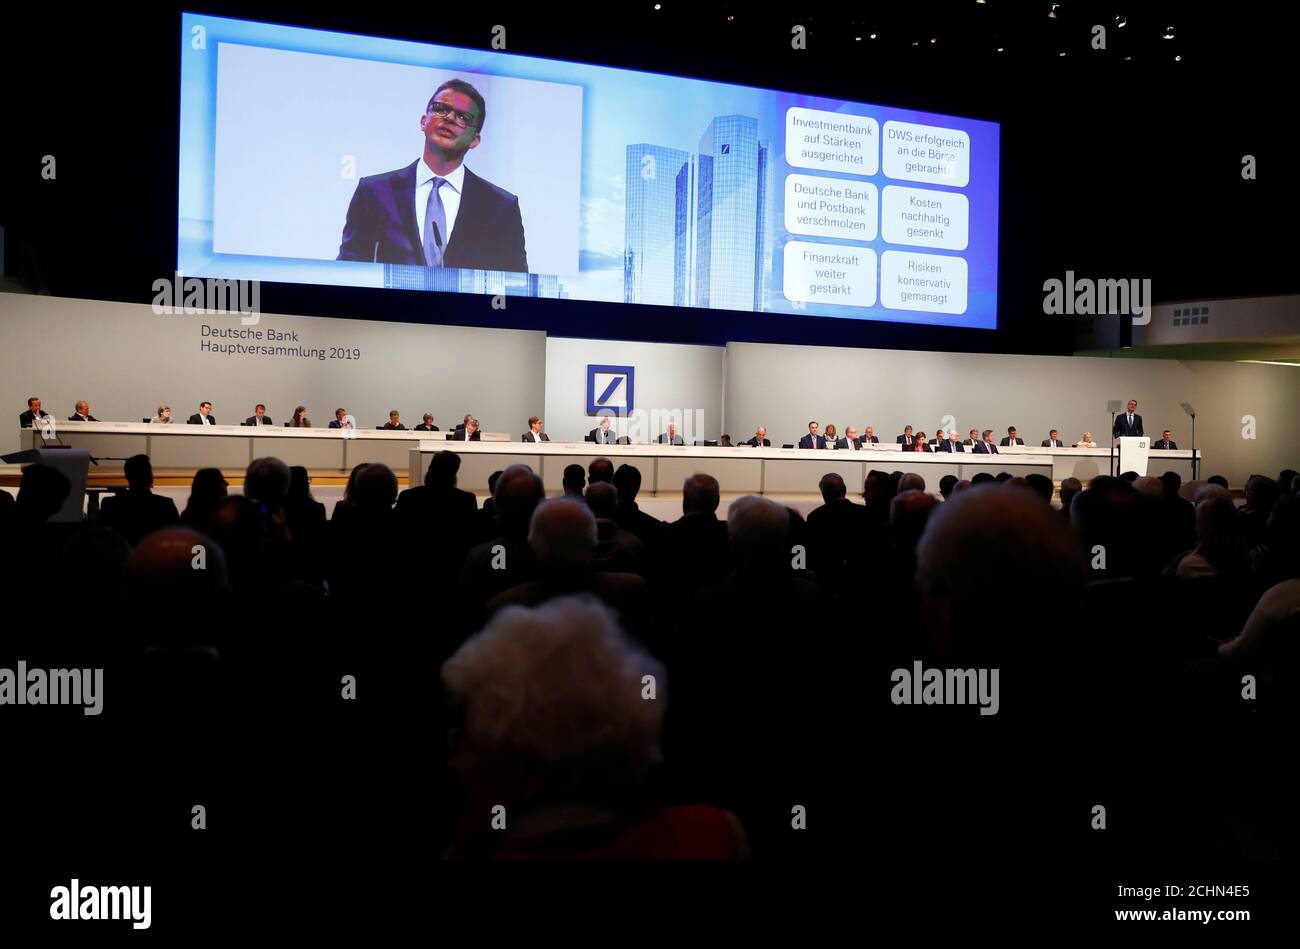 Ceo Christian Sewing Delivers A Speech During The Annual Shareholder Meeting Of Germany S Largest Business Bank Deutsche Bank In Frankfurt Germany May 23 19 Reuters Kai Pfaffenbach Stock Photo Alamy